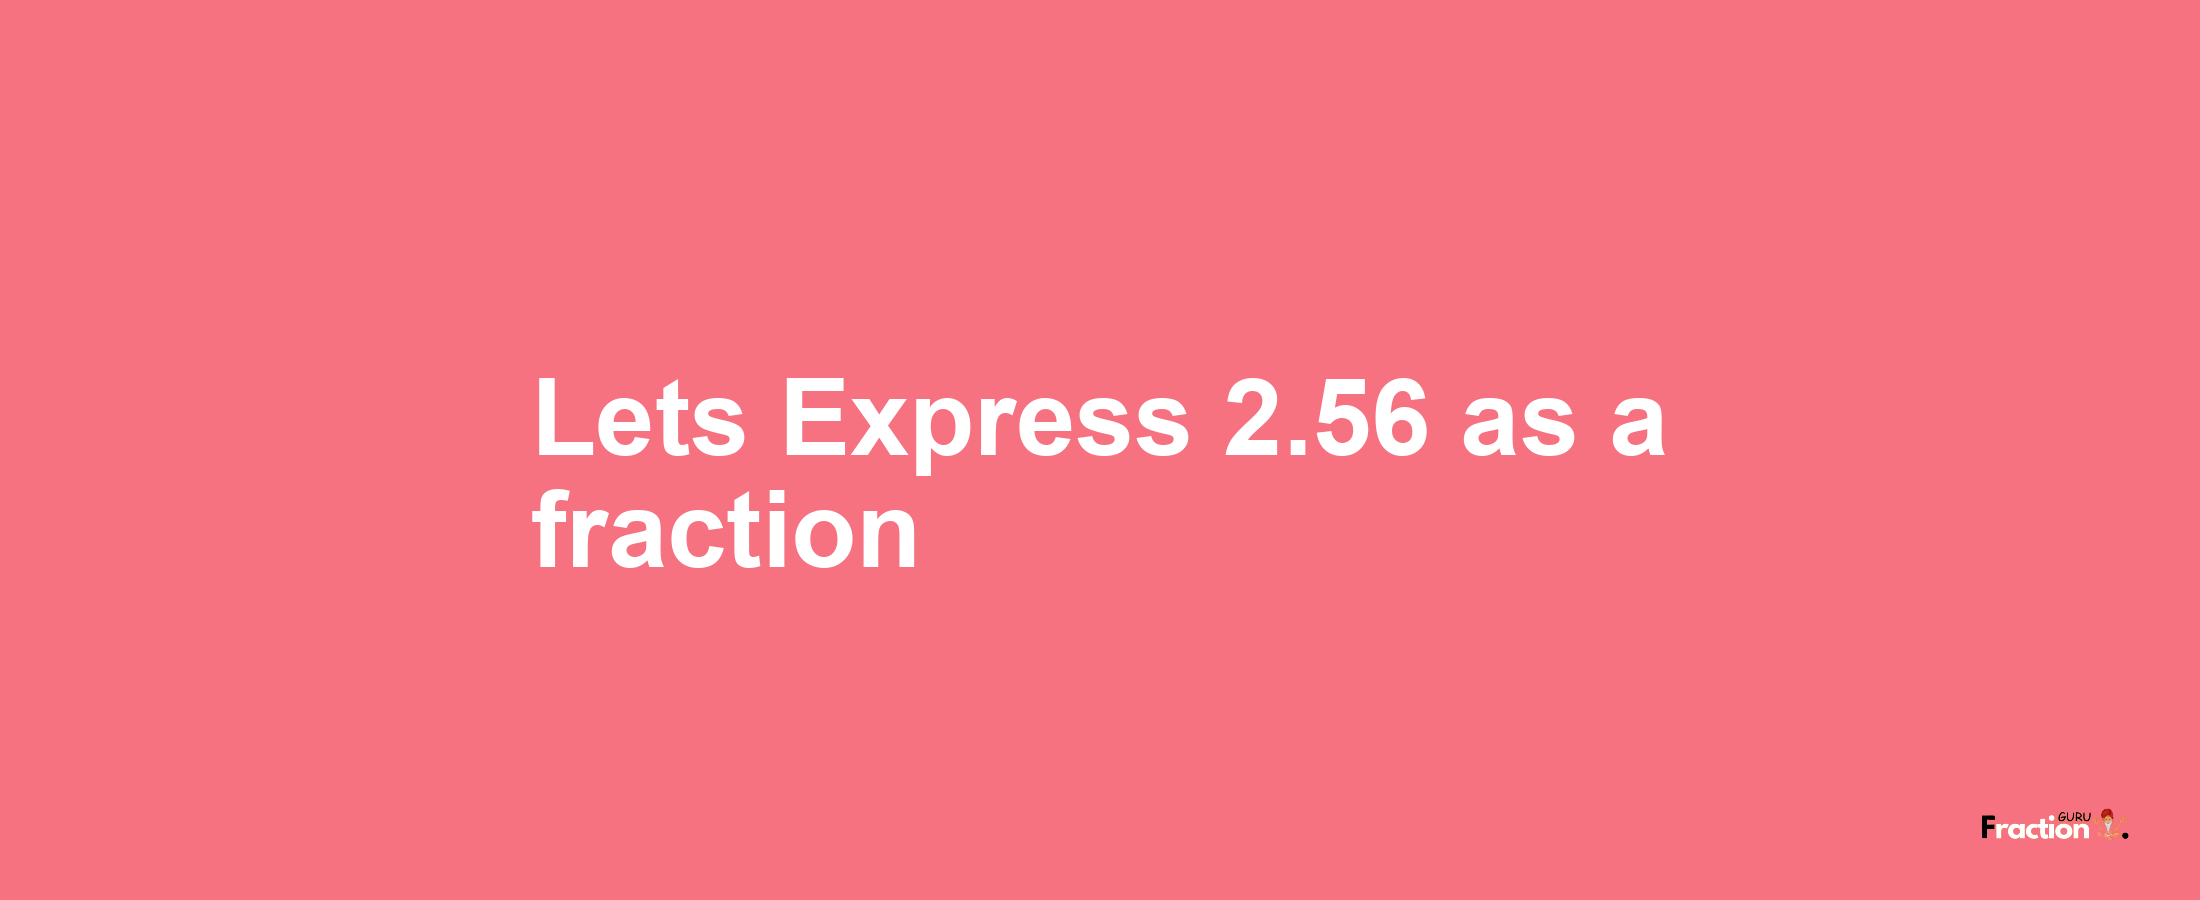 Lets Express 2.56 as afraction